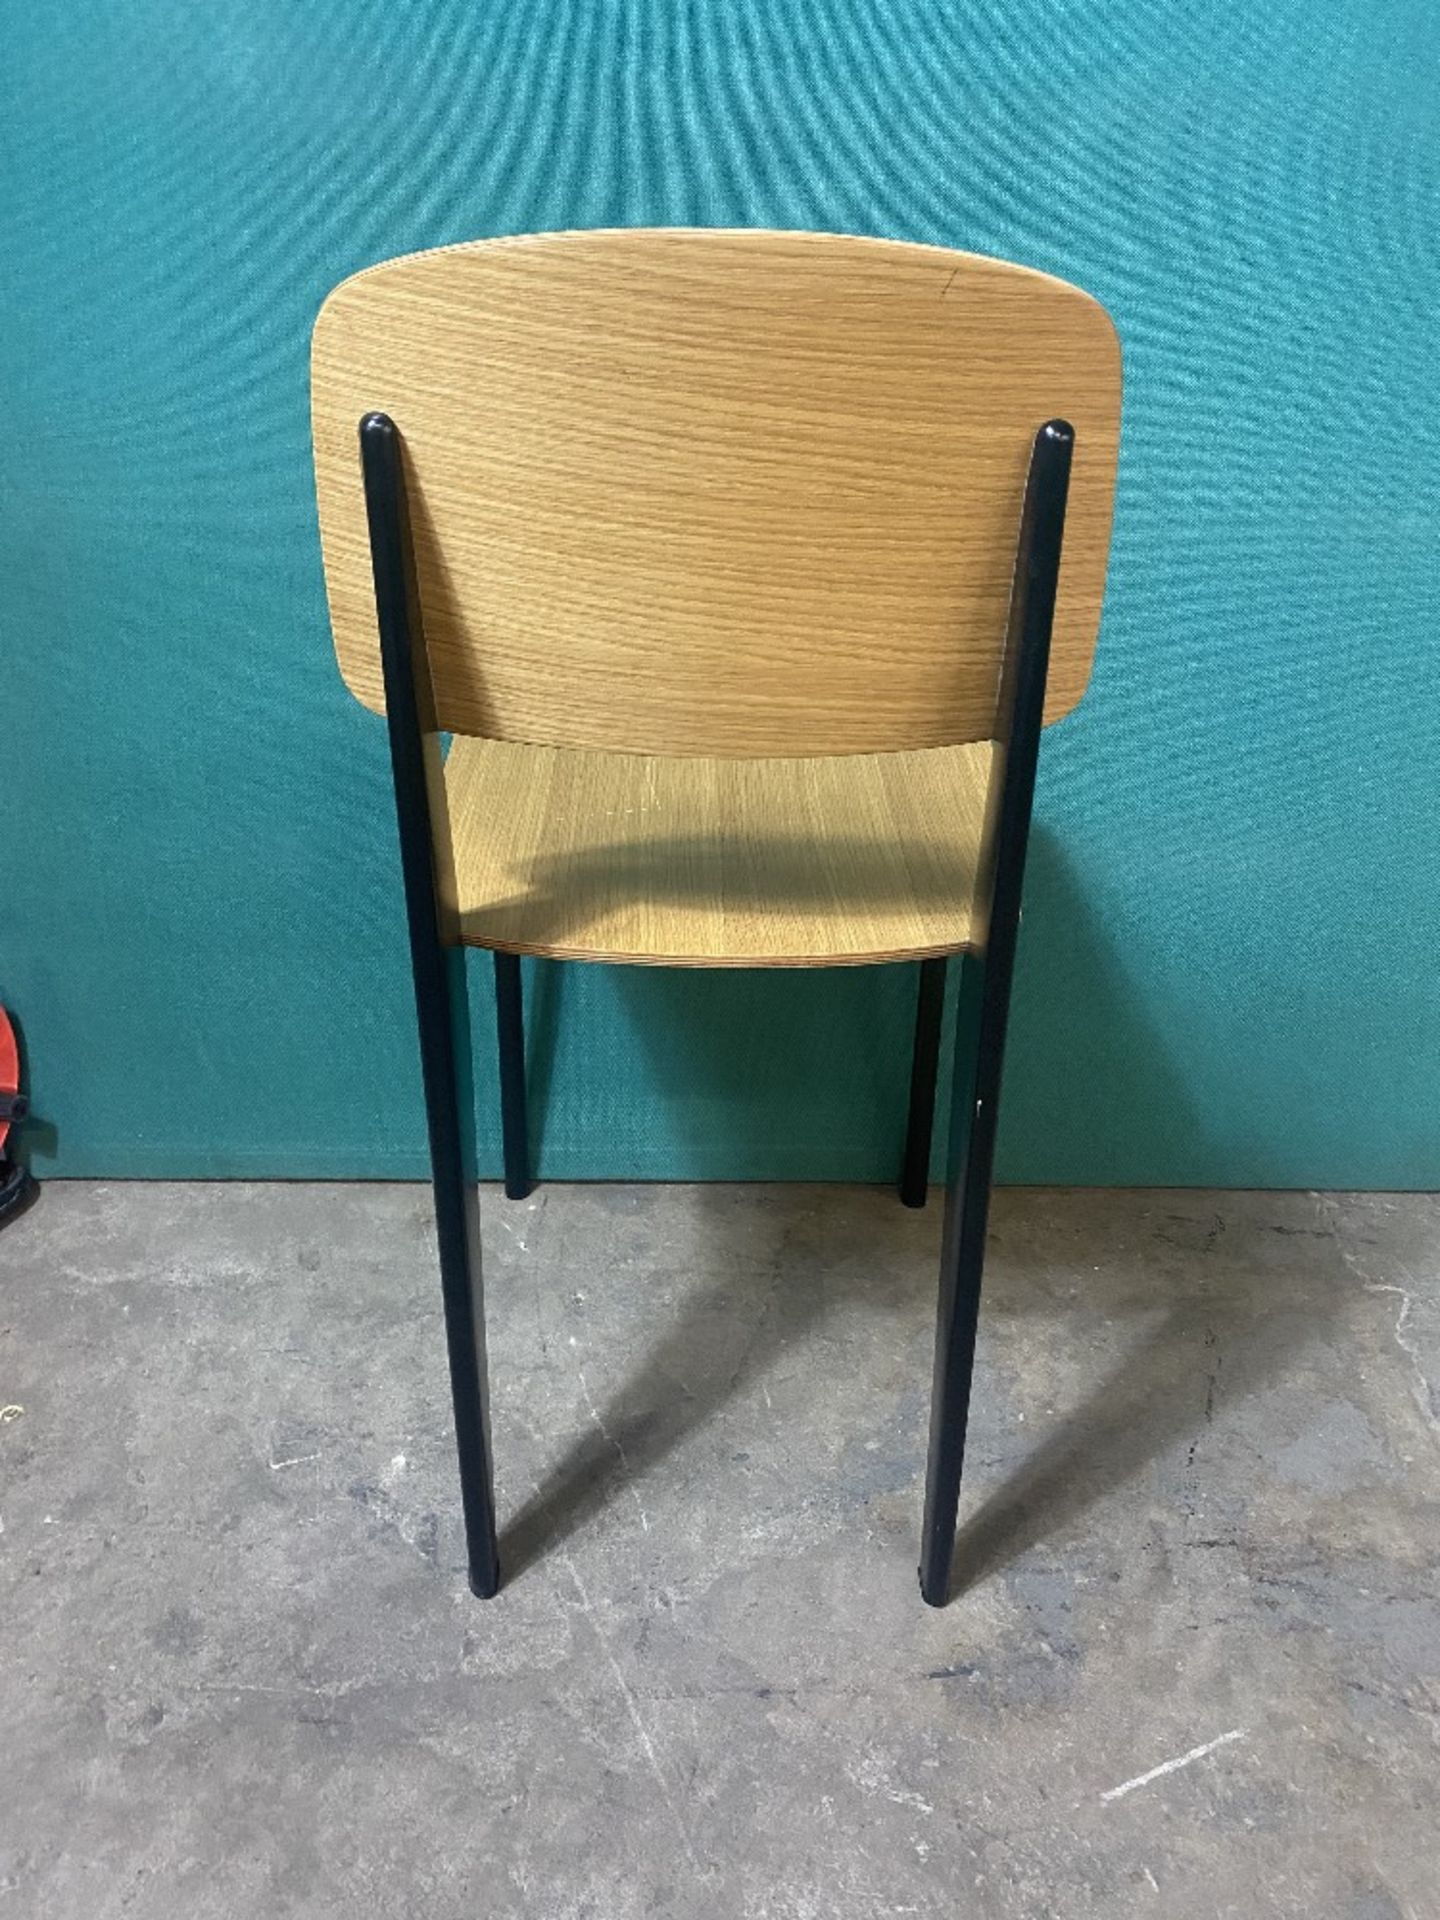 Pair Of Black Bistro Tables & Chairs Sets - See Description & Photos - Image 12 of 12